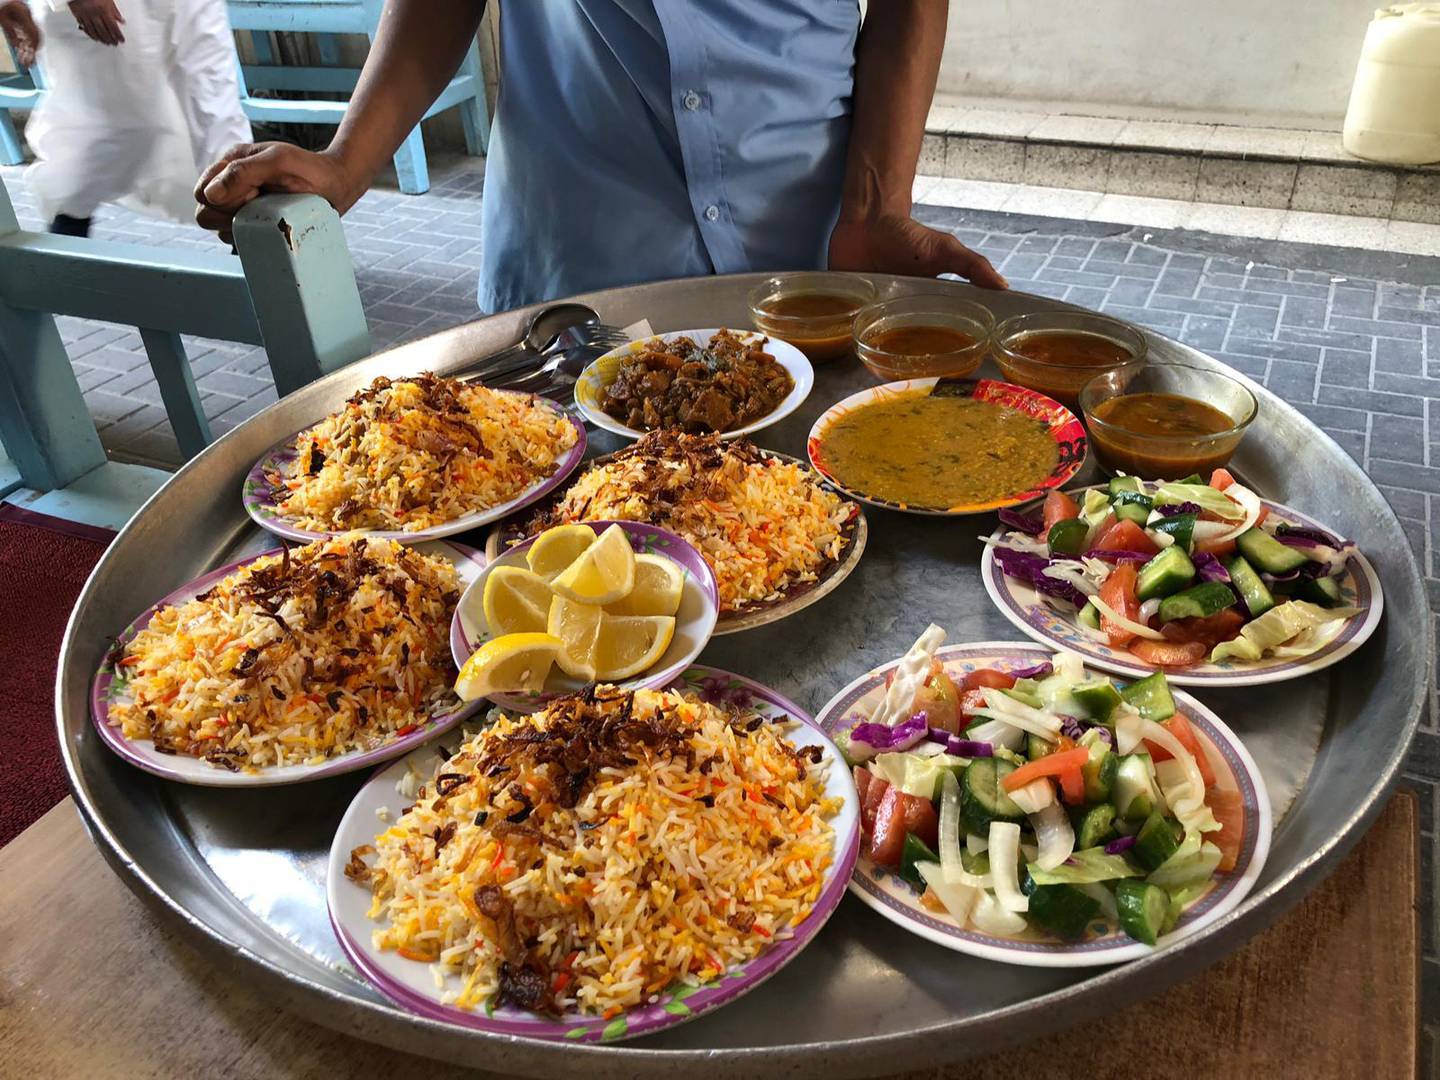 A traditional lunch at Haji’s Café, one of Bahrain's oldest eateries. Sophie Prideaux / The National 